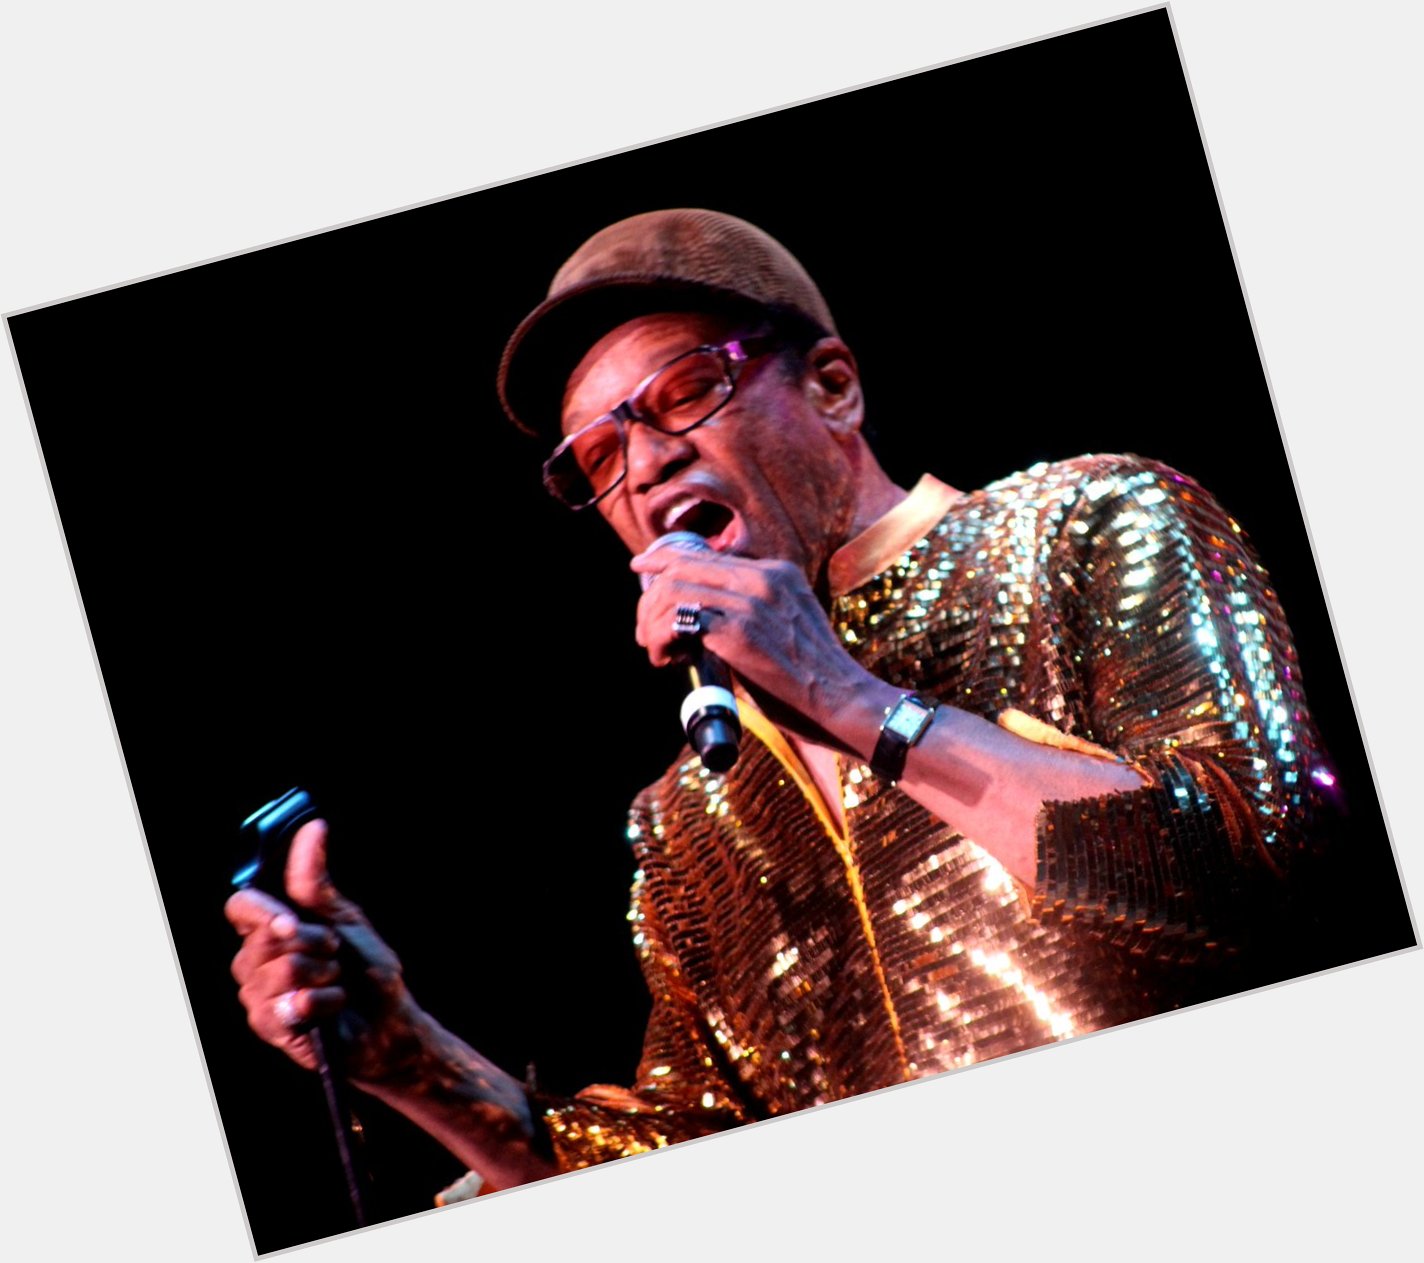 Remembering the smooth vocals of Bobby Womack... HaPpY BirThDaY!! 